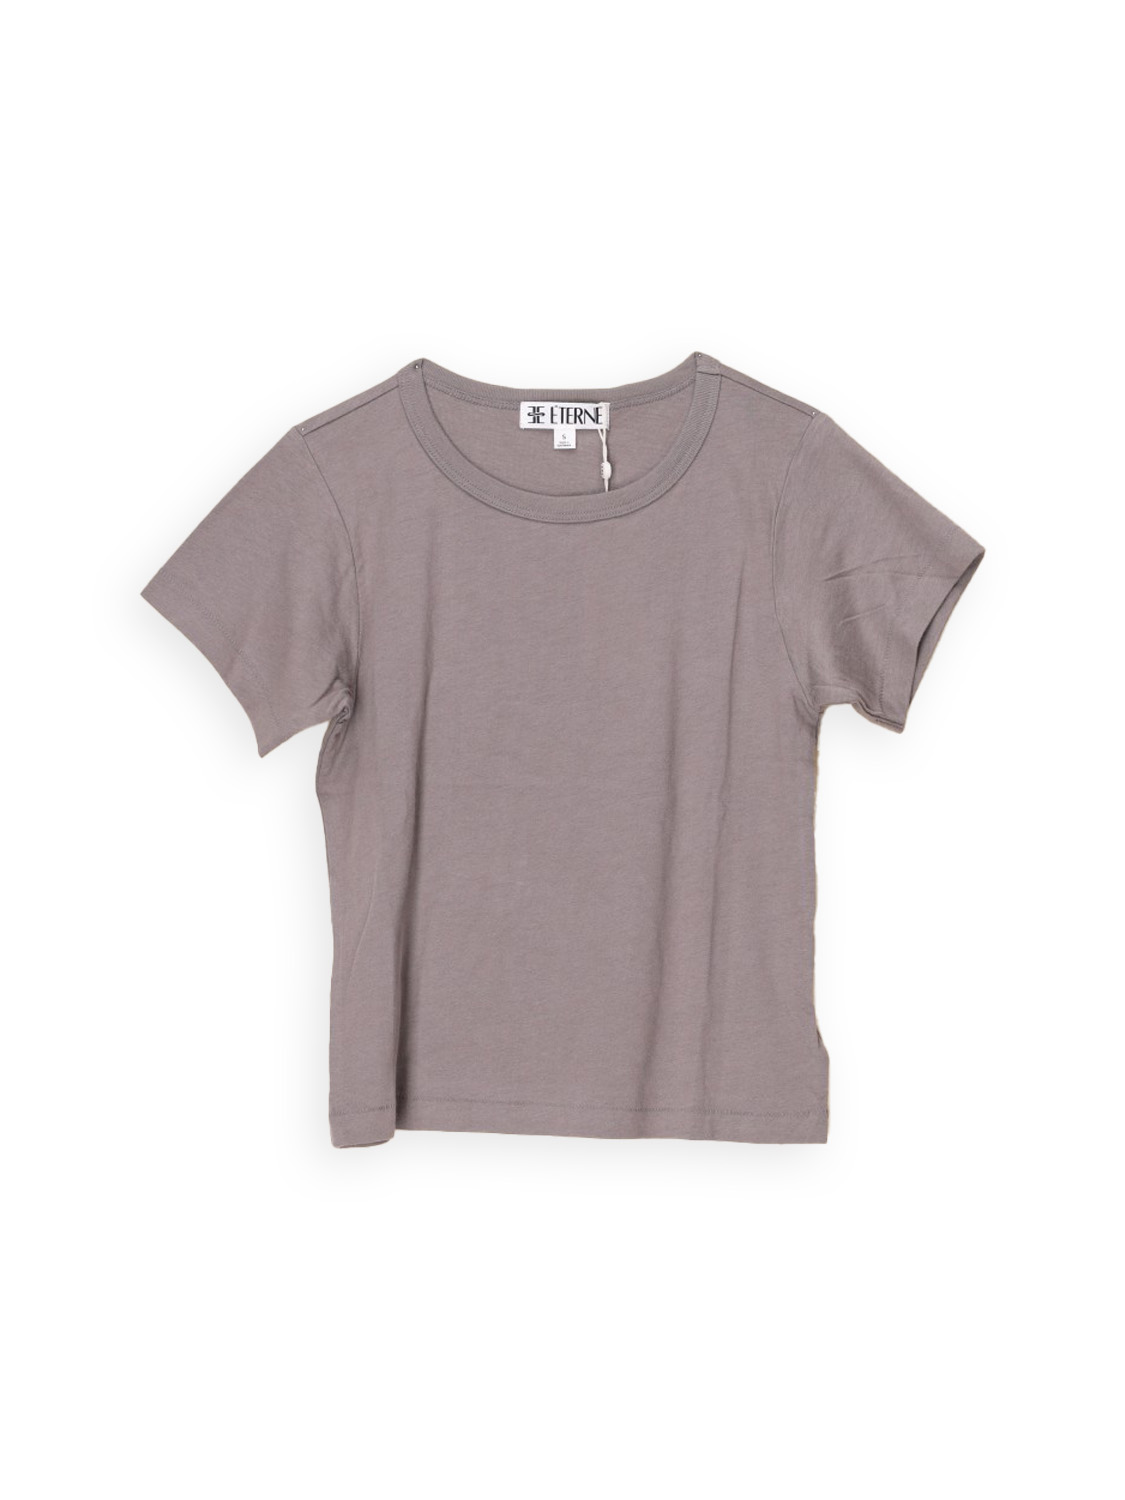 Baby Tee – cropped shirt made from a cotton blend 